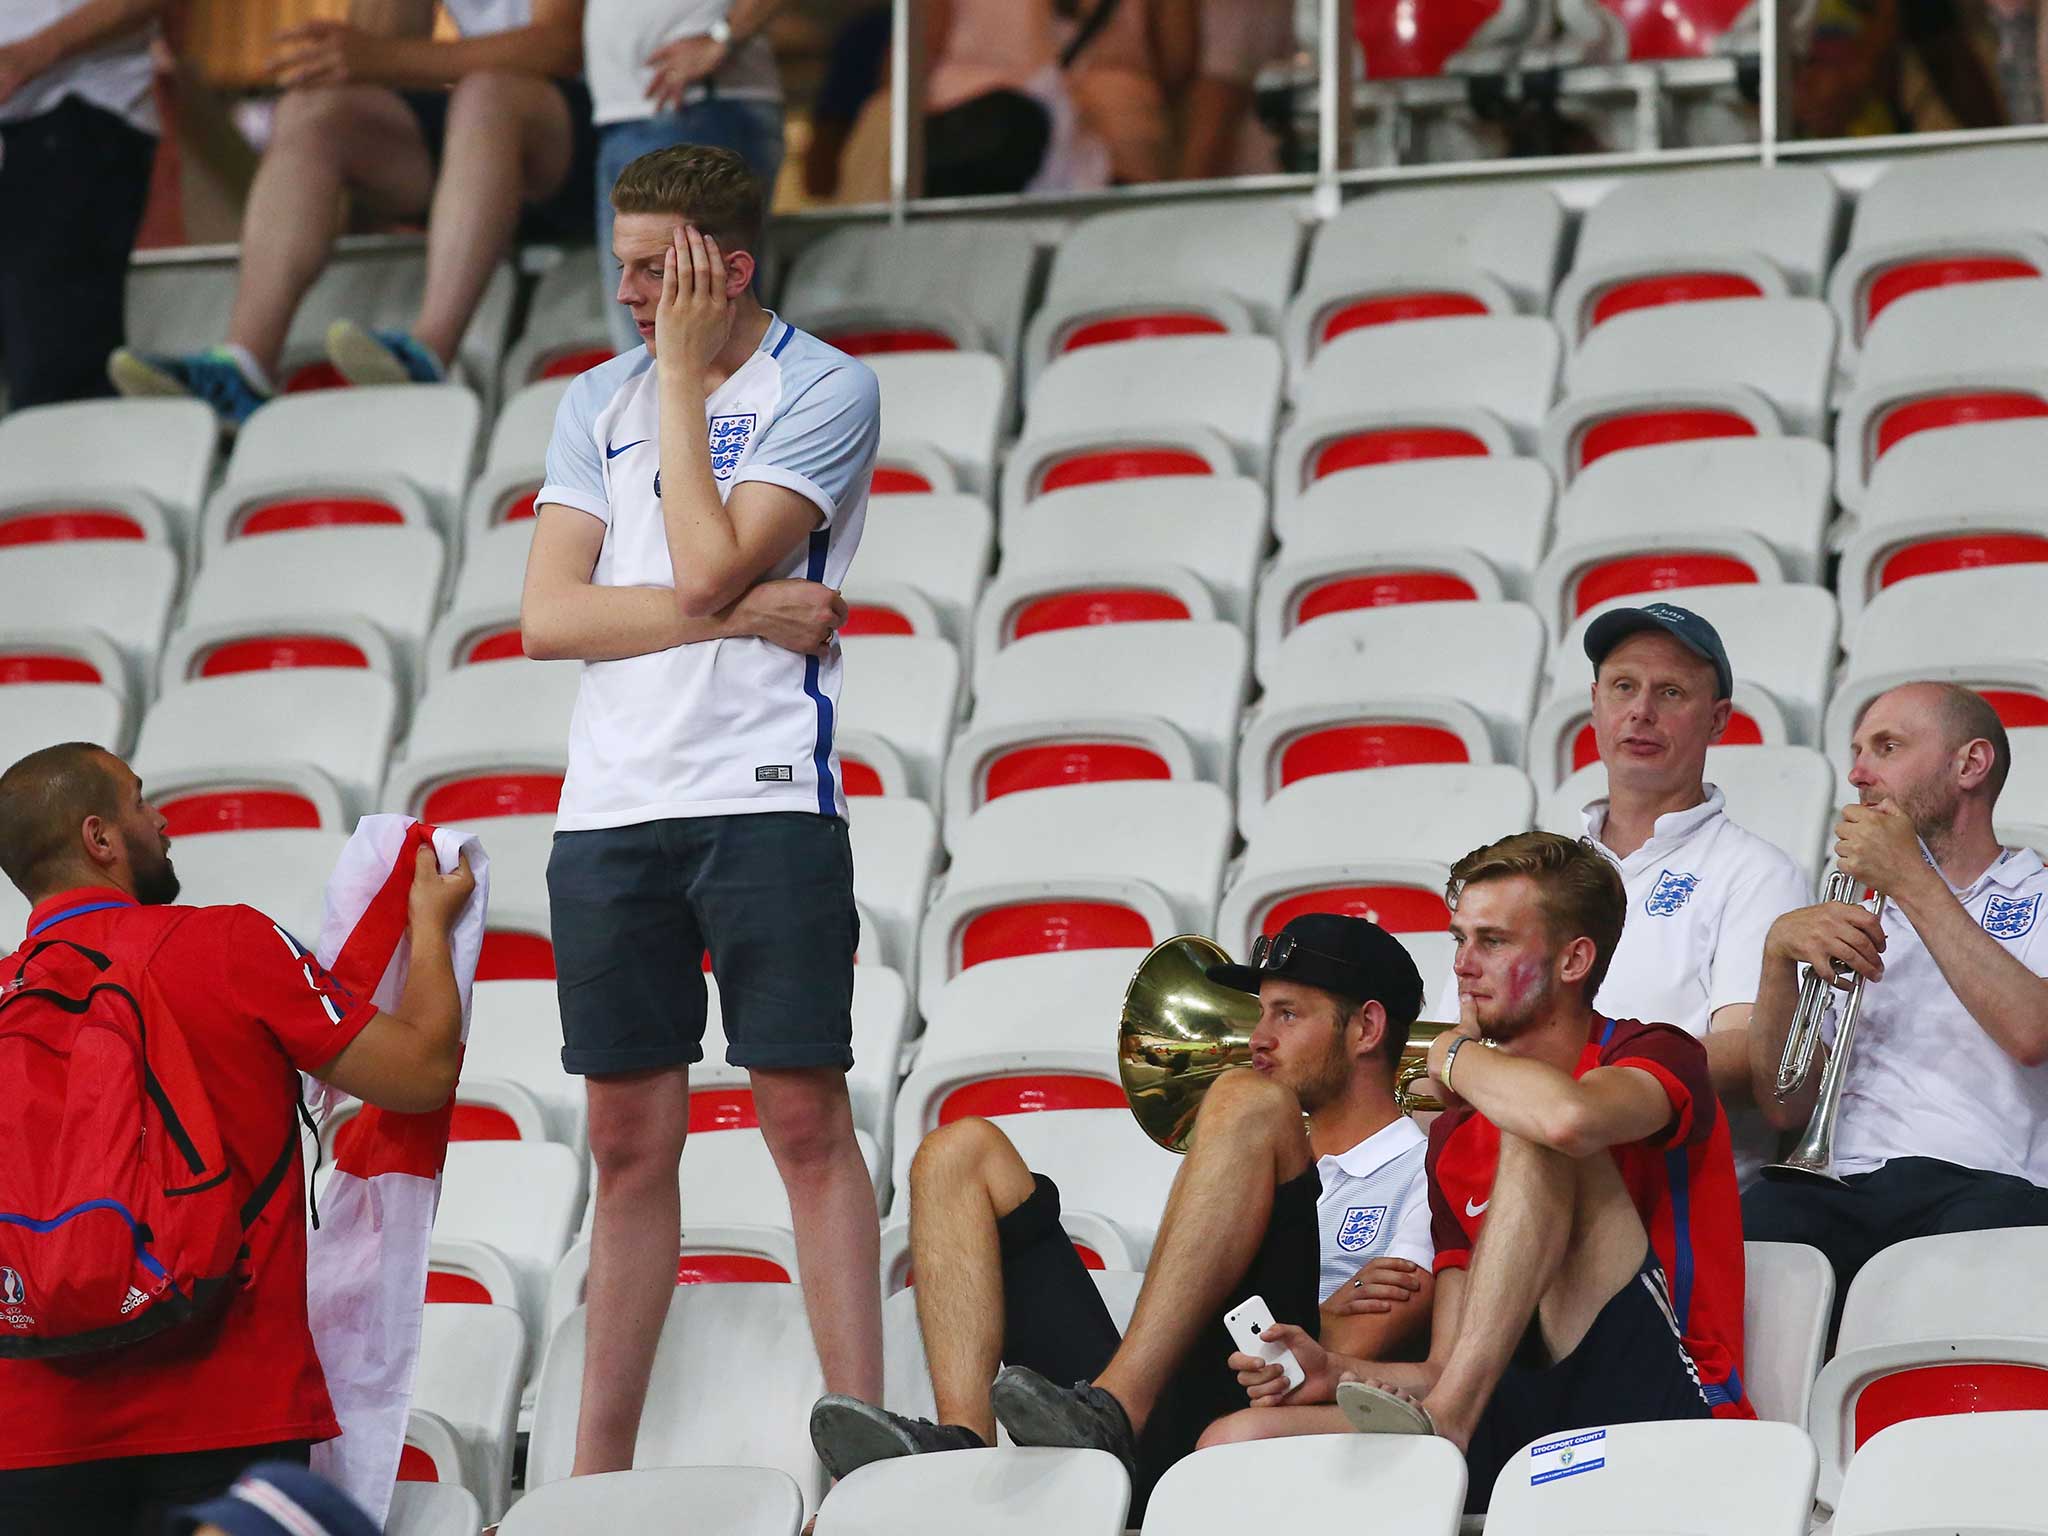 England supporters have endured a tough few weeks - for differing reasons - in France this summer